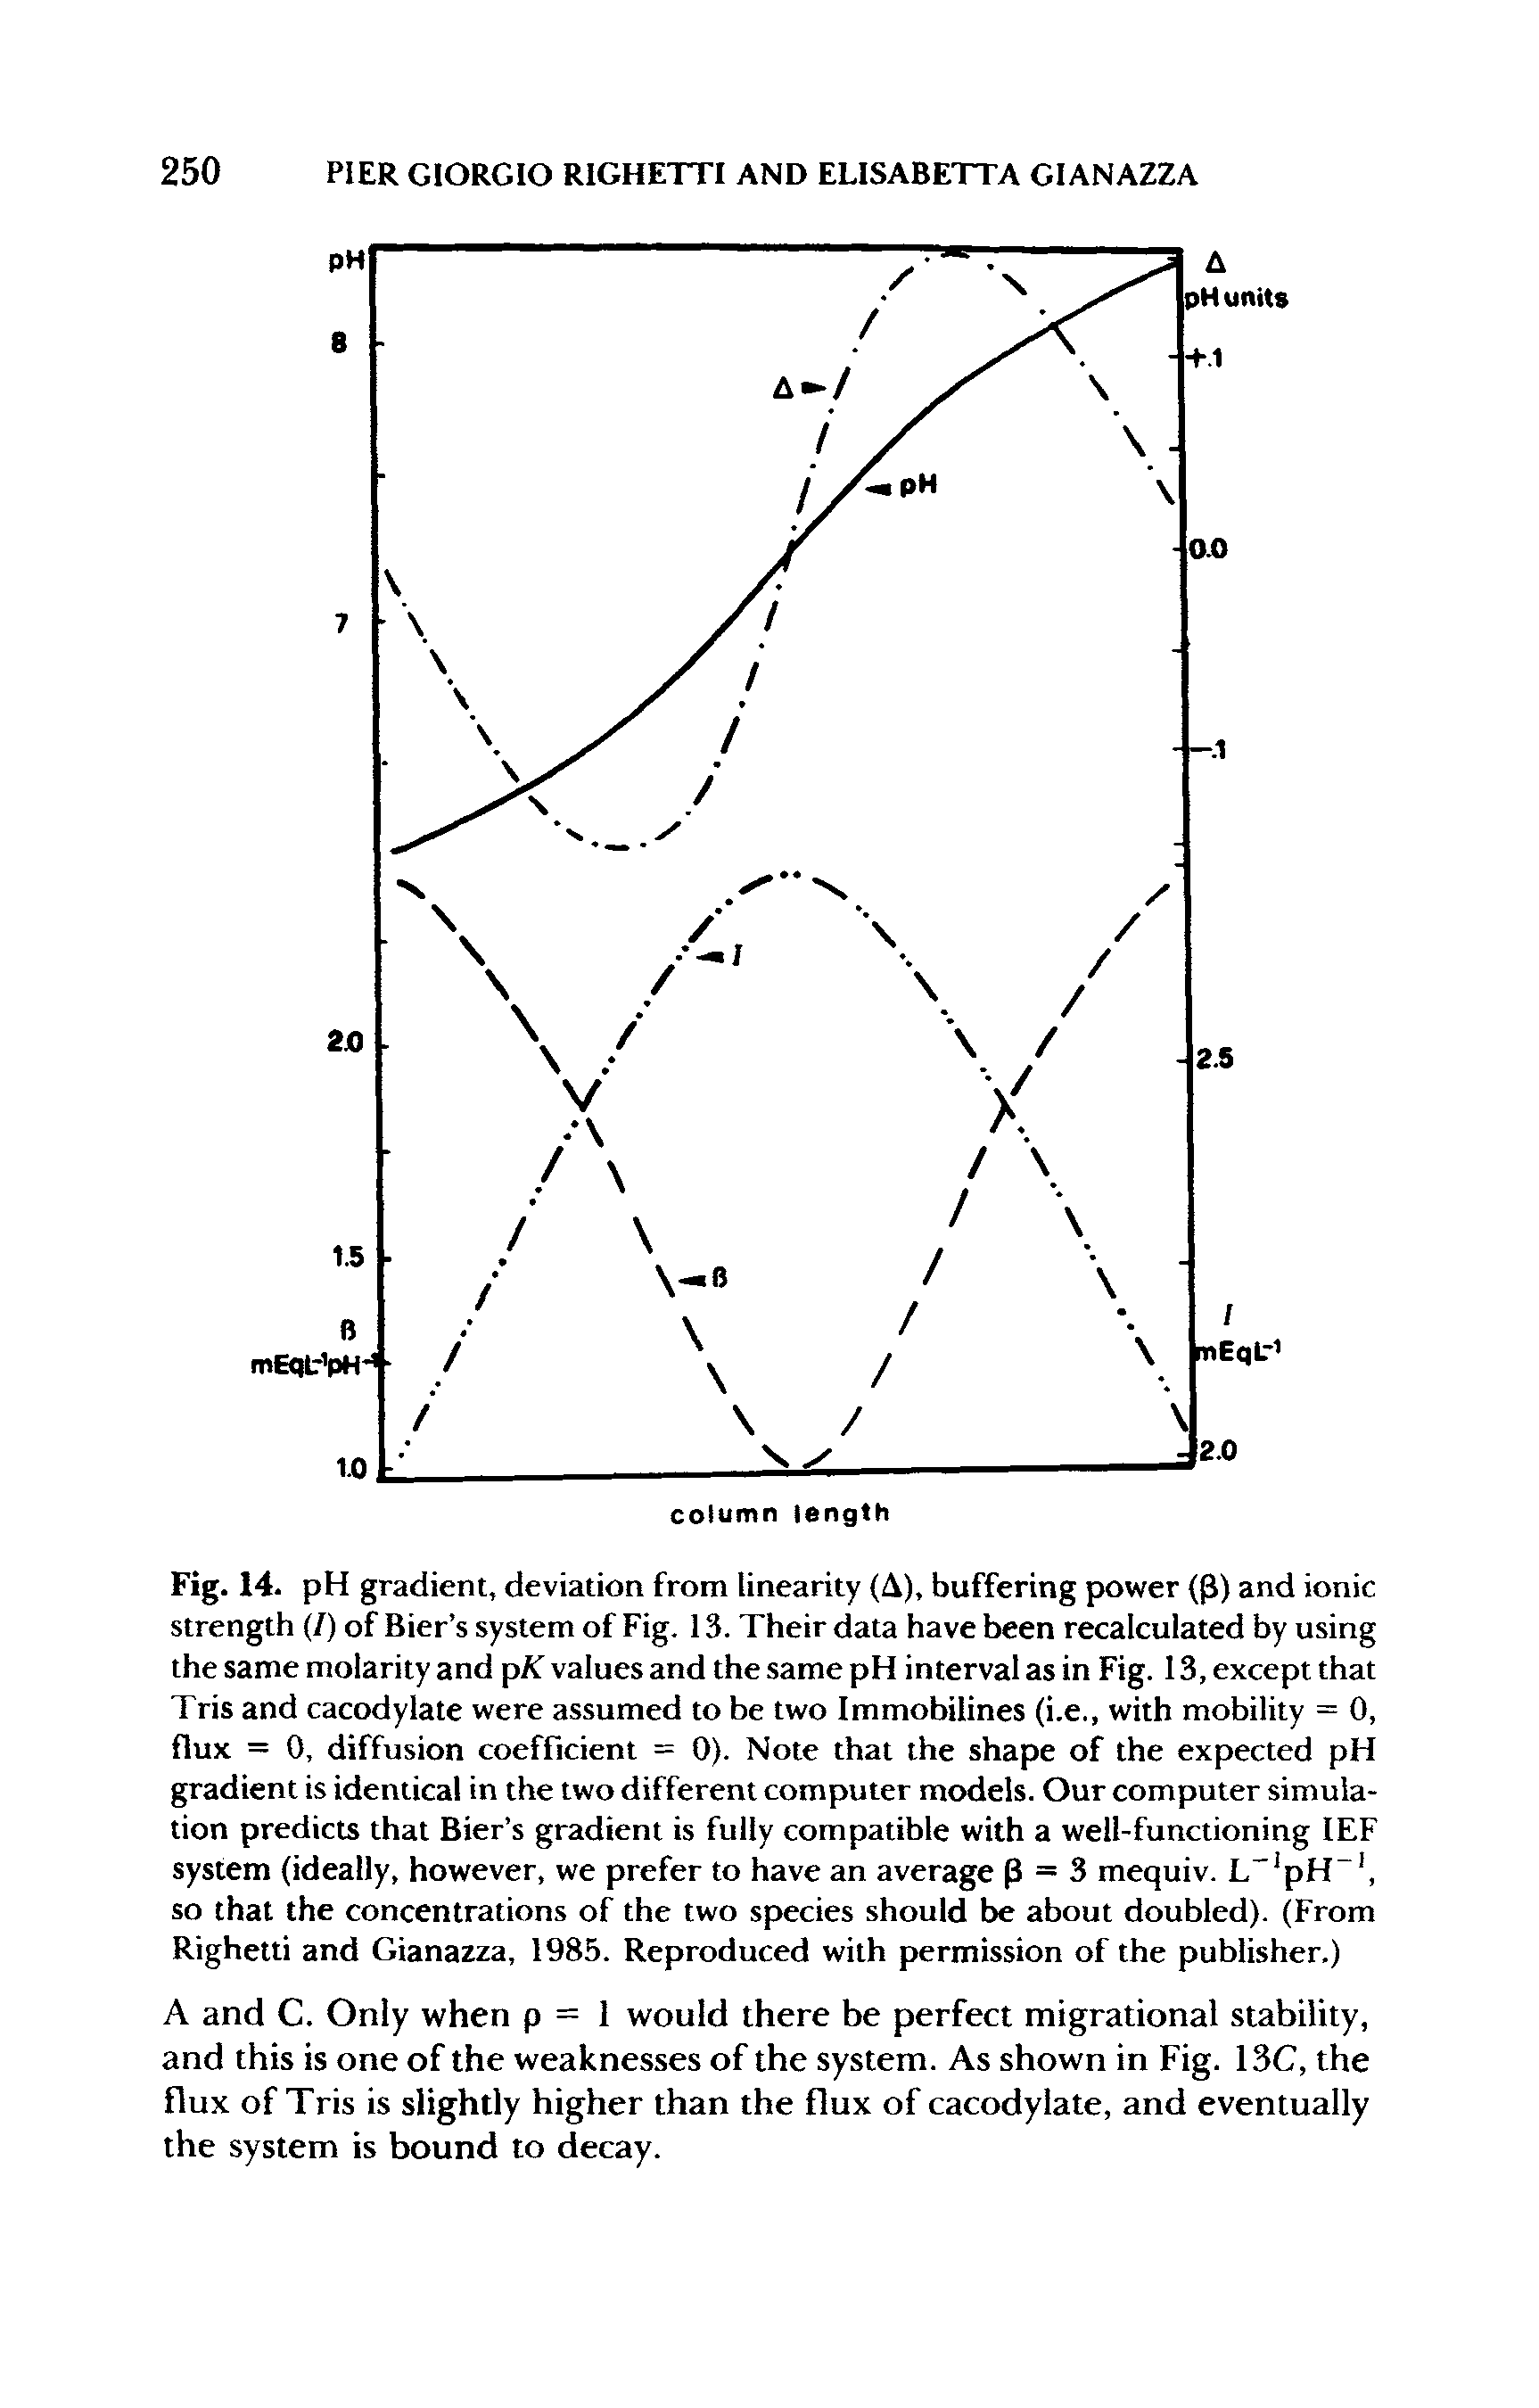 Fig. 14. pH gradient, deviation from linearity (A), buffering power (p) and ionic strength (/) of Bier s system of Fig. 13. Their data have been recalculated by using the same molarity and p/f values and the same pH interval as in Fig. 13, except that Tris and cacodylate were assumed to be two Immobilines (i.e., with mobility = 0, flux = 0, diffusion coefficient = 0). Note that the shape of the expected pH gradient is identical in the two different computer models. Our computer simulation predicts that Bier s gradient is fully compatible with a well-functioning lEF system (ideally, however, we prefer to have an average p = 3 mequiv. L pH, so that the concentrations of the two species should be about doubled). (From Righetti and Gianazza, 1985. Reproduced with permission of the publisher.)...